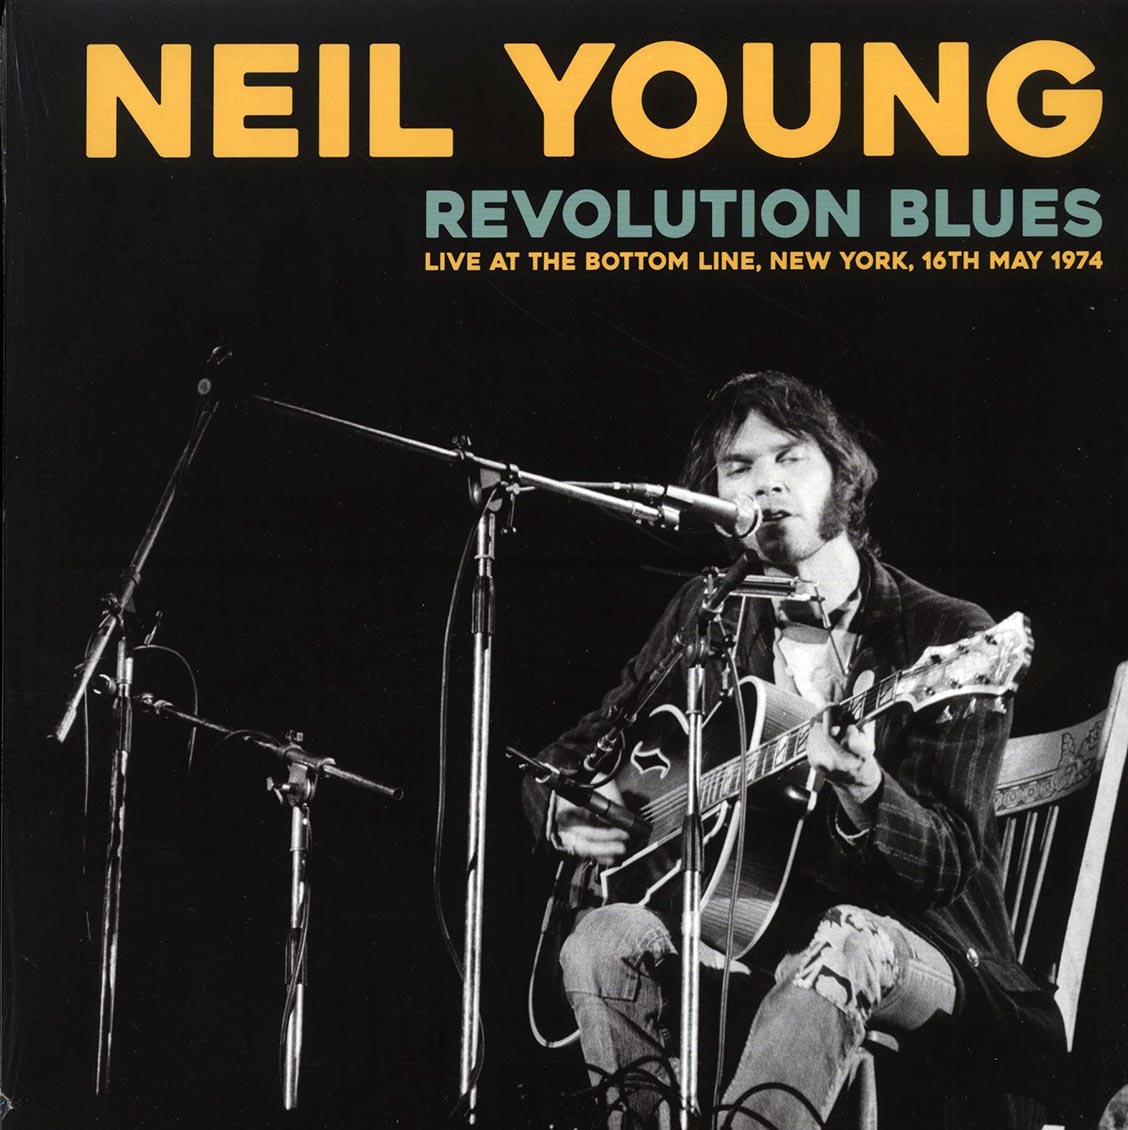 Neil Young - Revolution Blues: Live At The Bottom Line, New York, 16th May 1974 (ltd. 500 copies made) - Vinyl LP